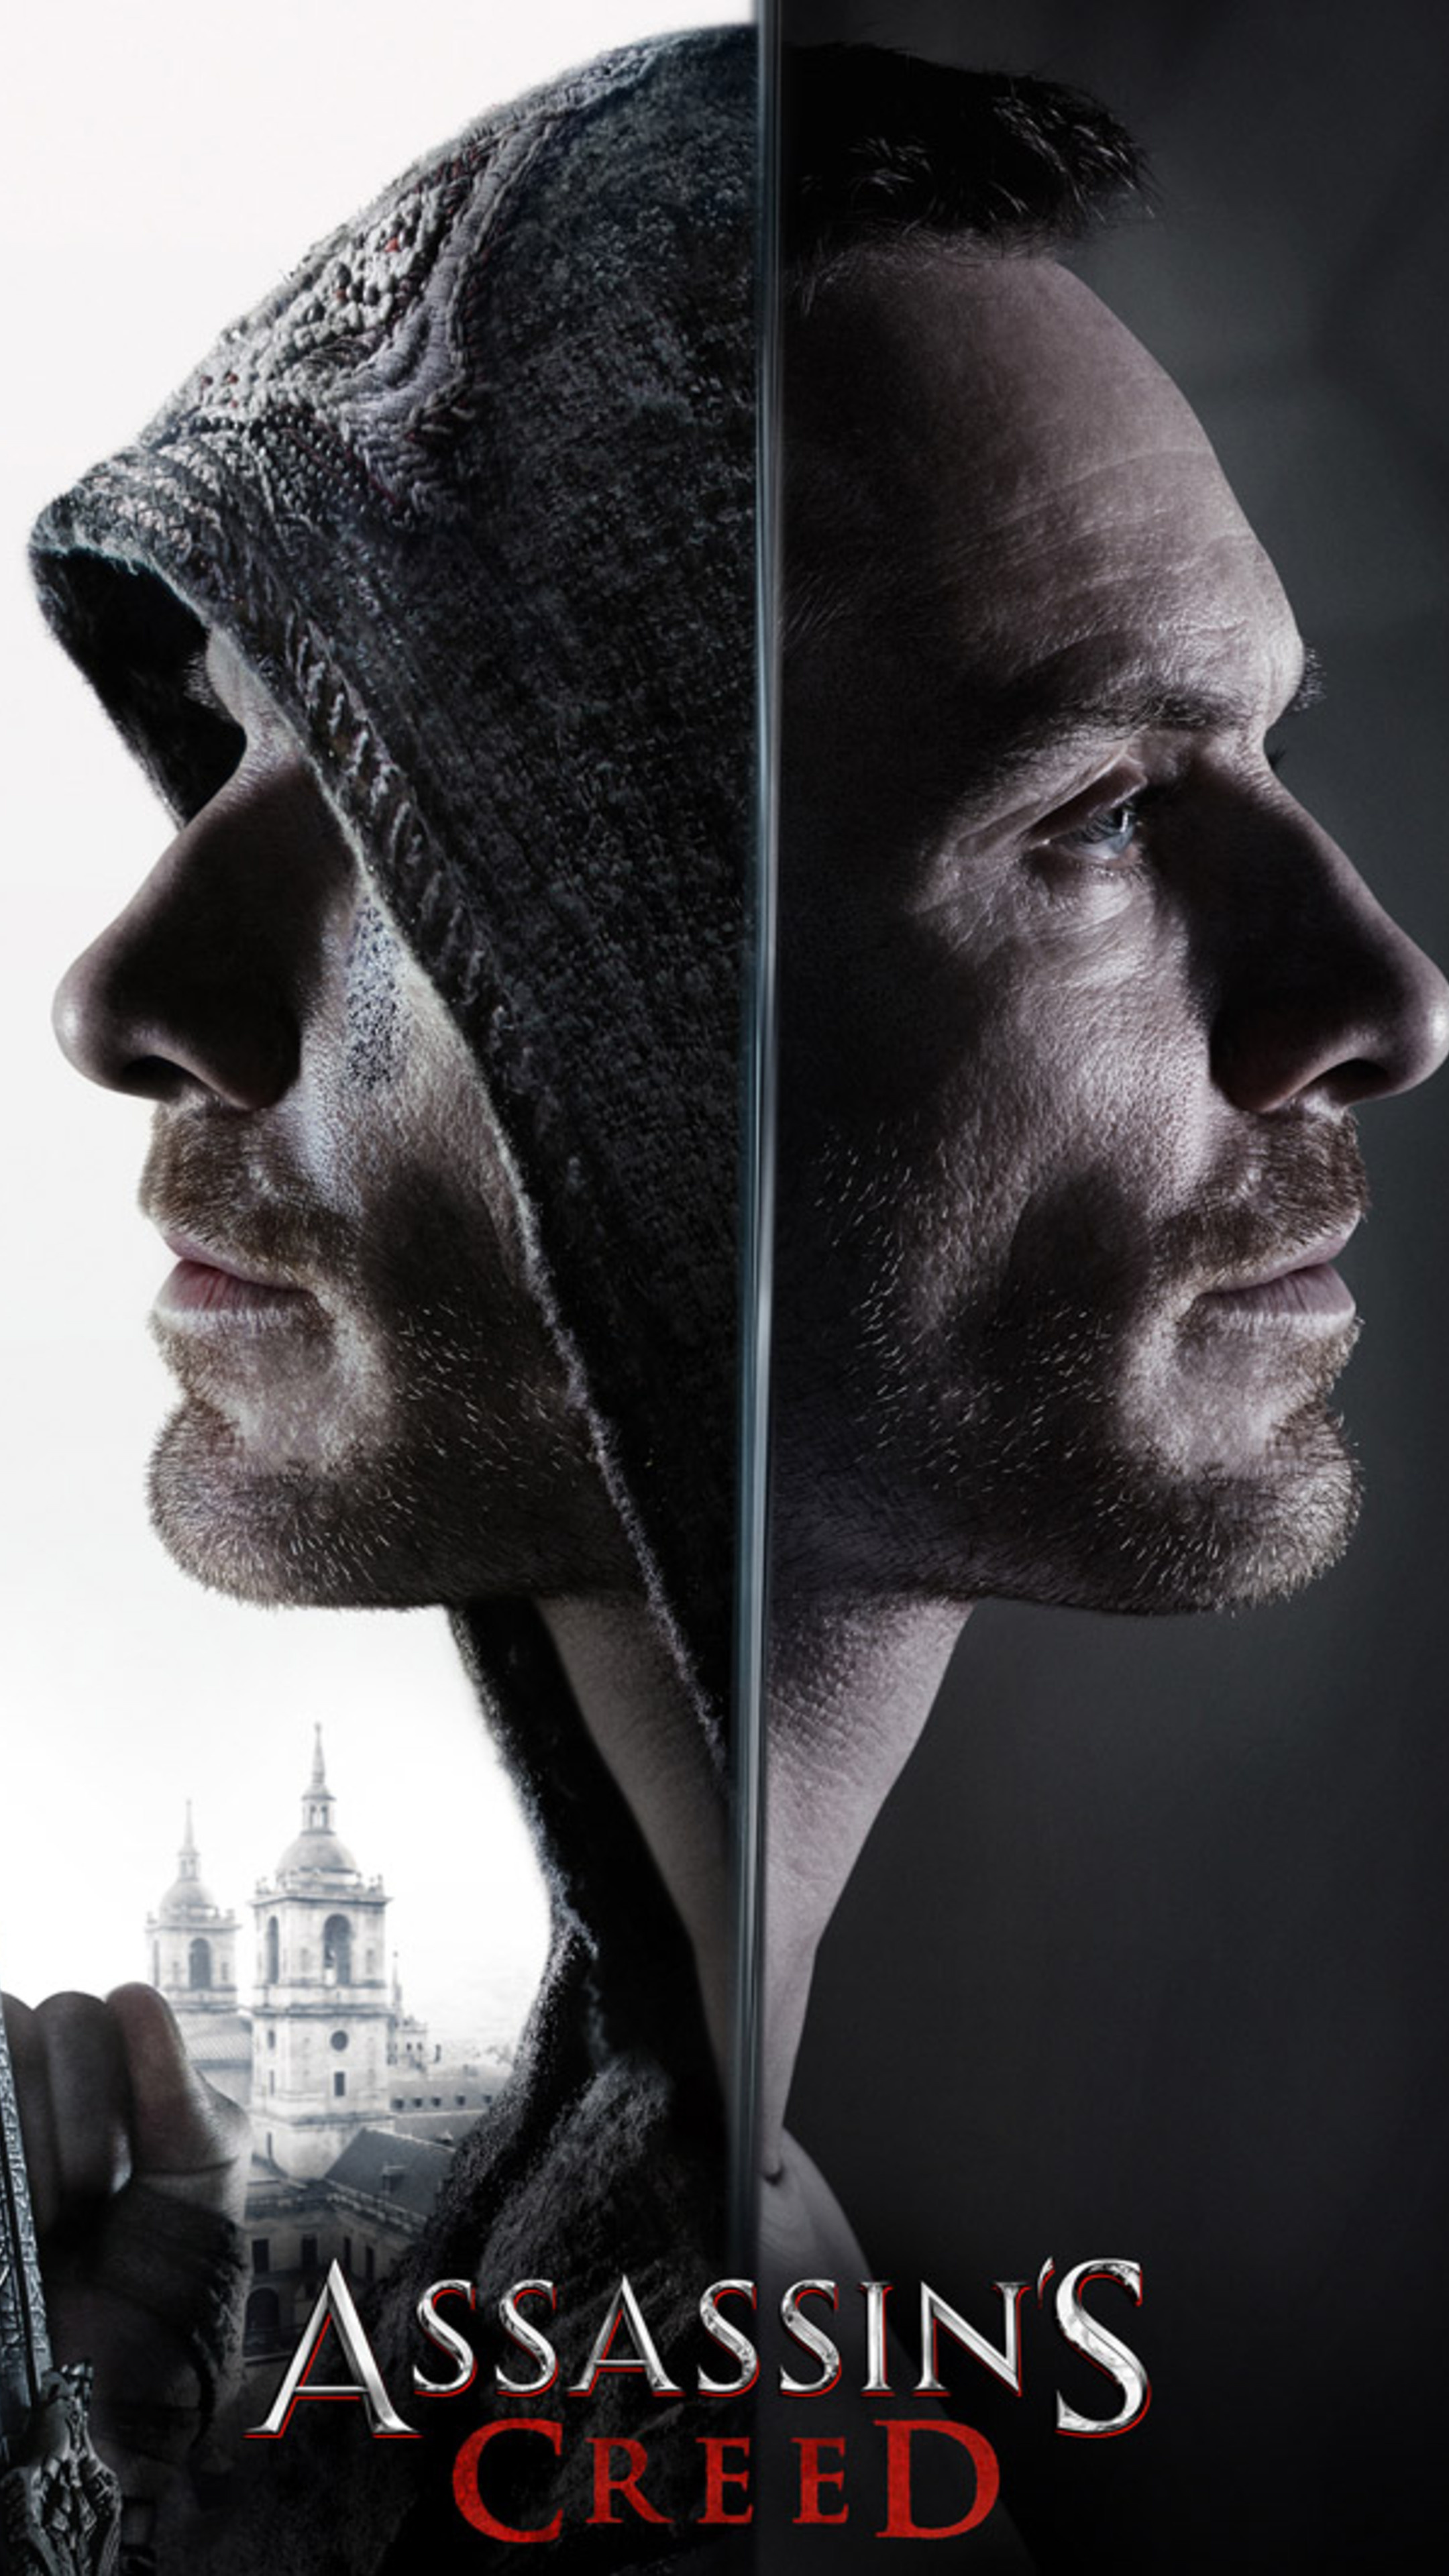 Assassin's Creed, Movie wallpaper, Sony Xperia, High definition, 2160x3840 4K Phone